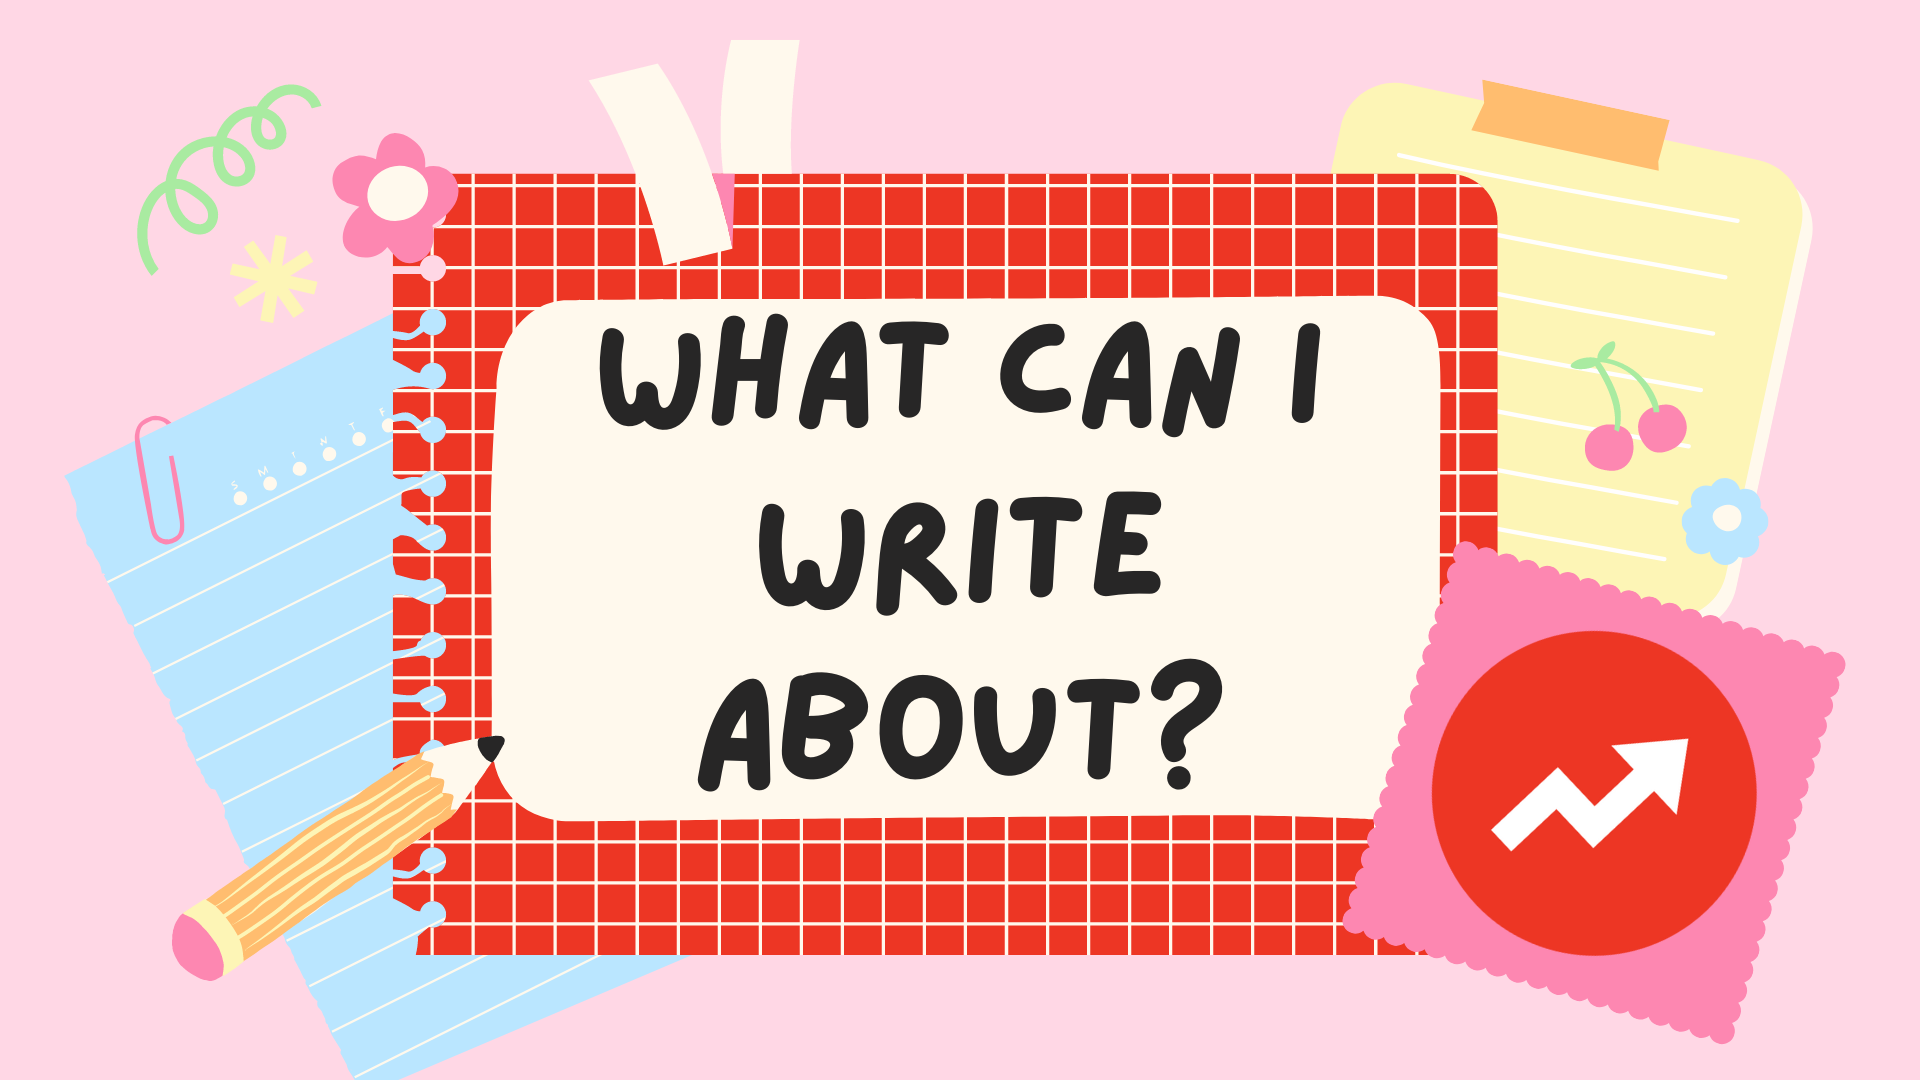 what can i write about?